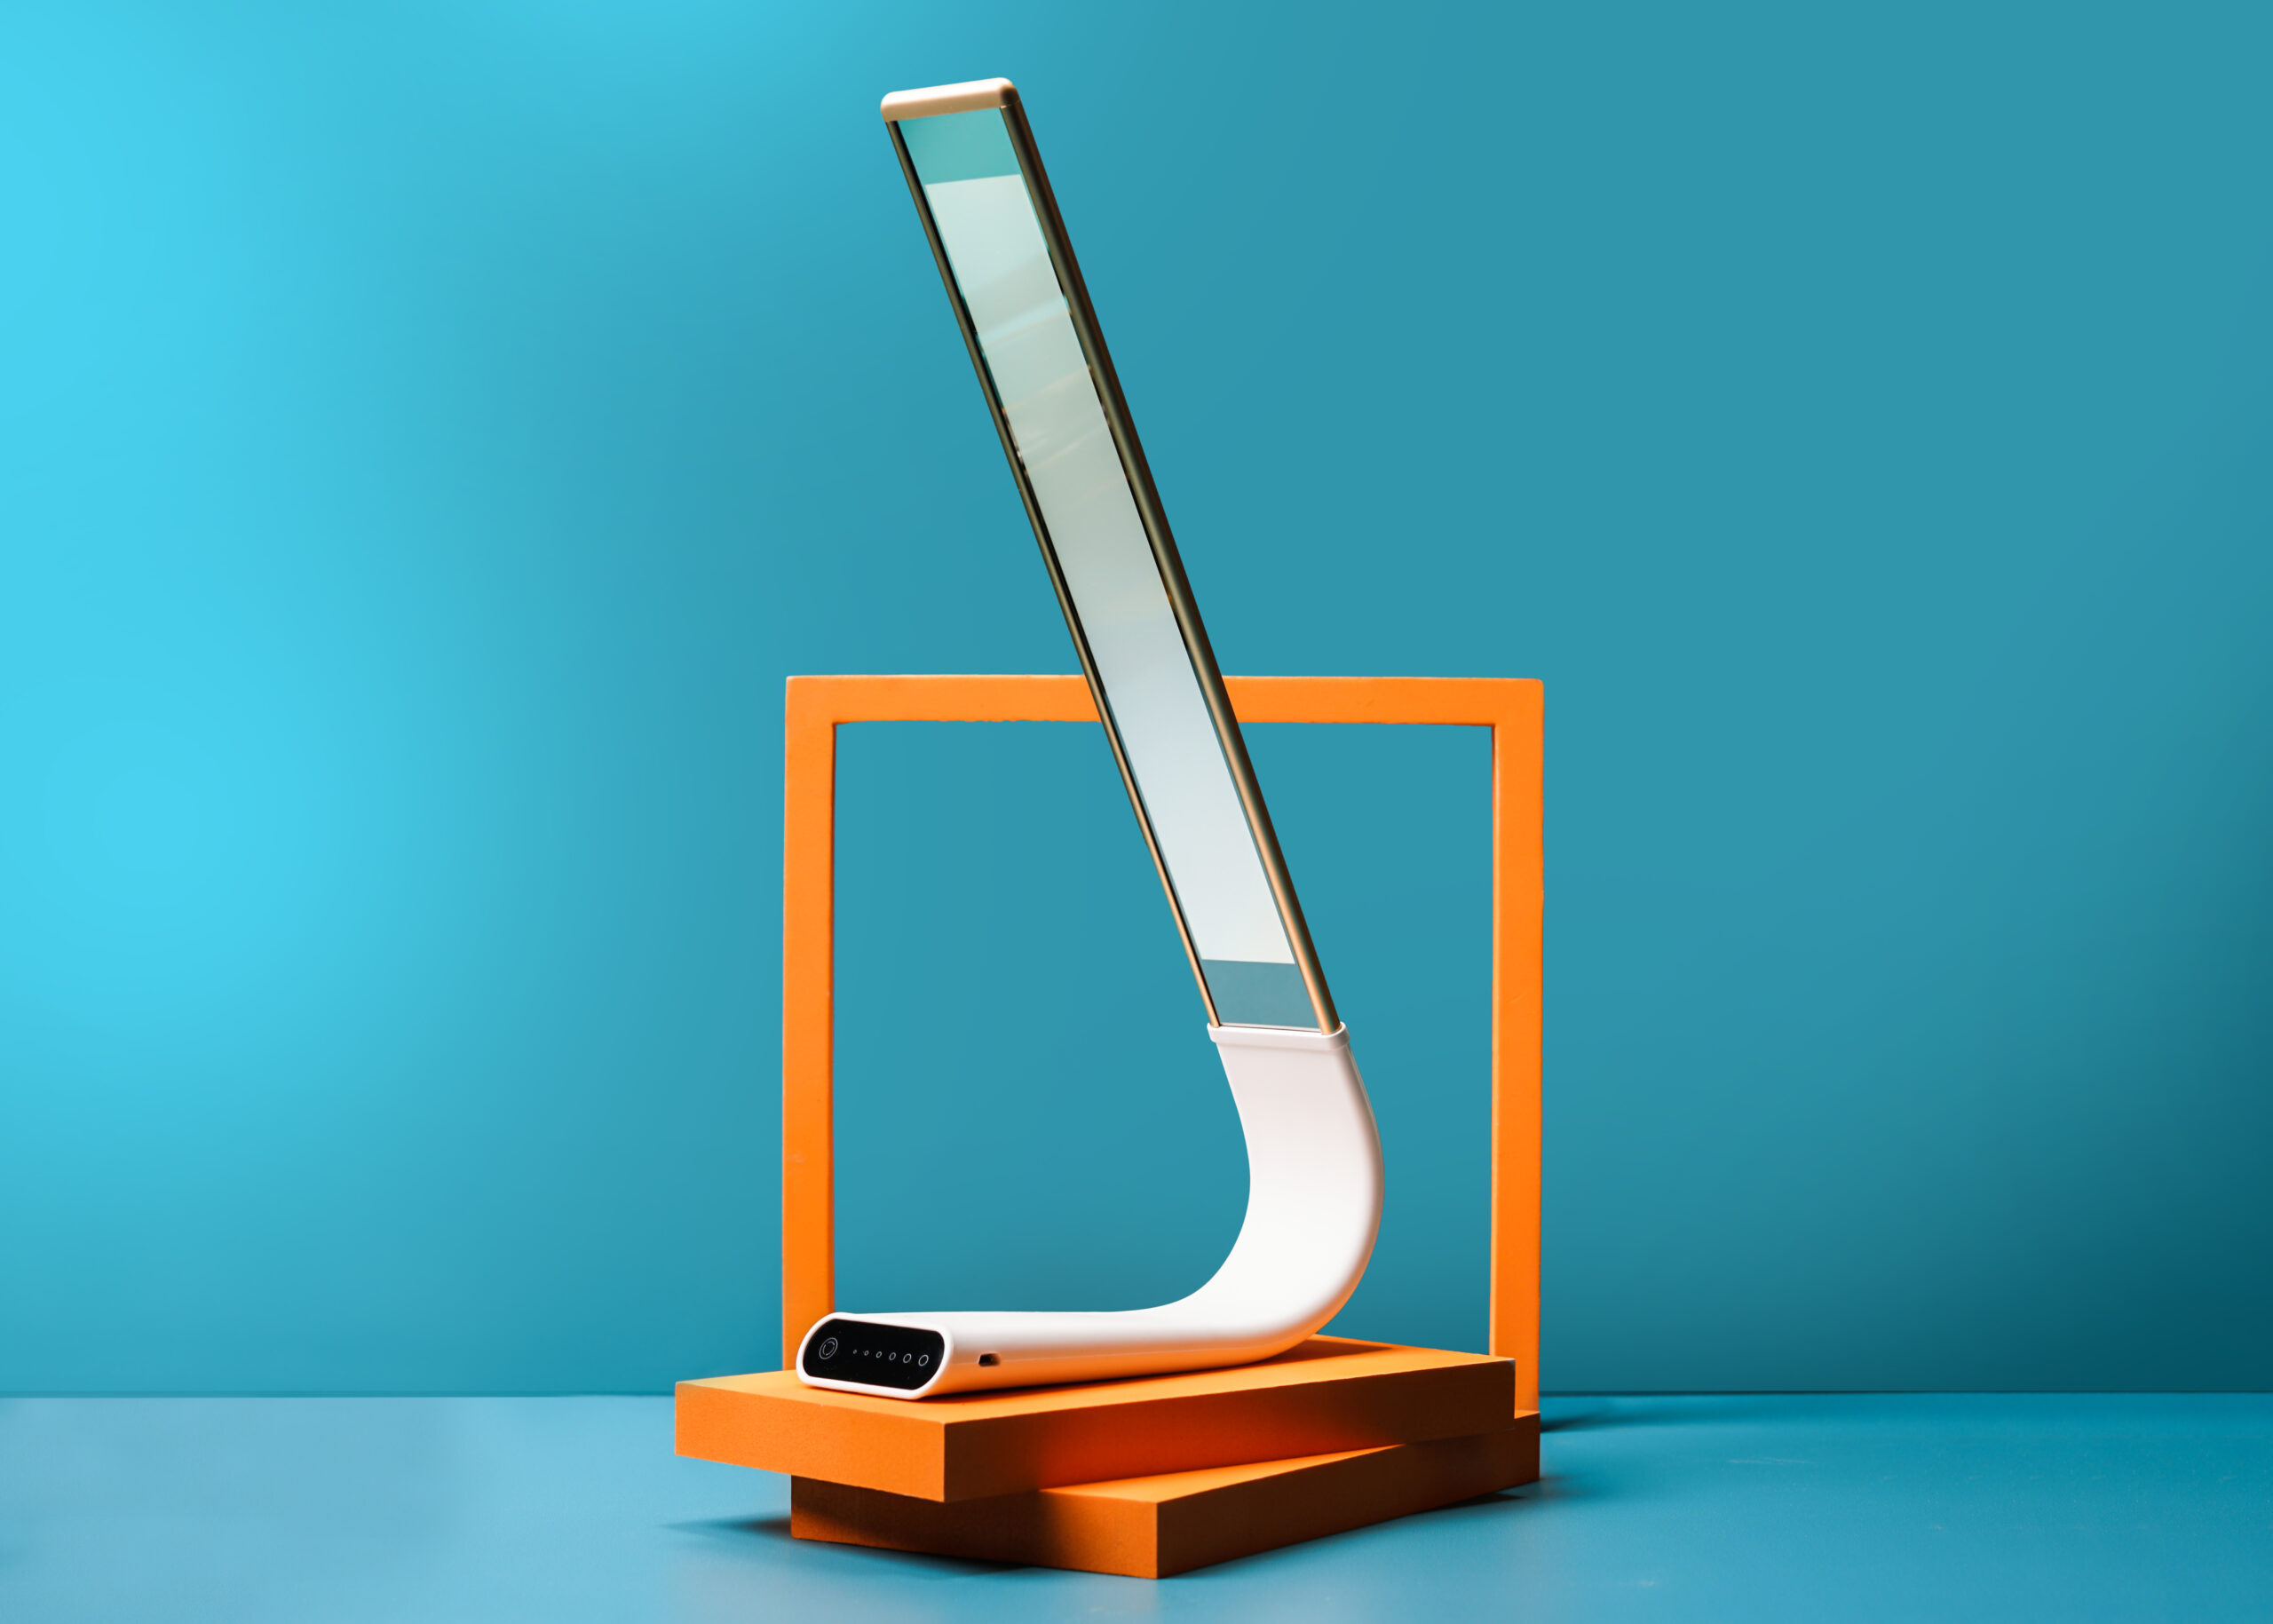 Oculamp All Day, All Night Light by Ocushield is a great gift